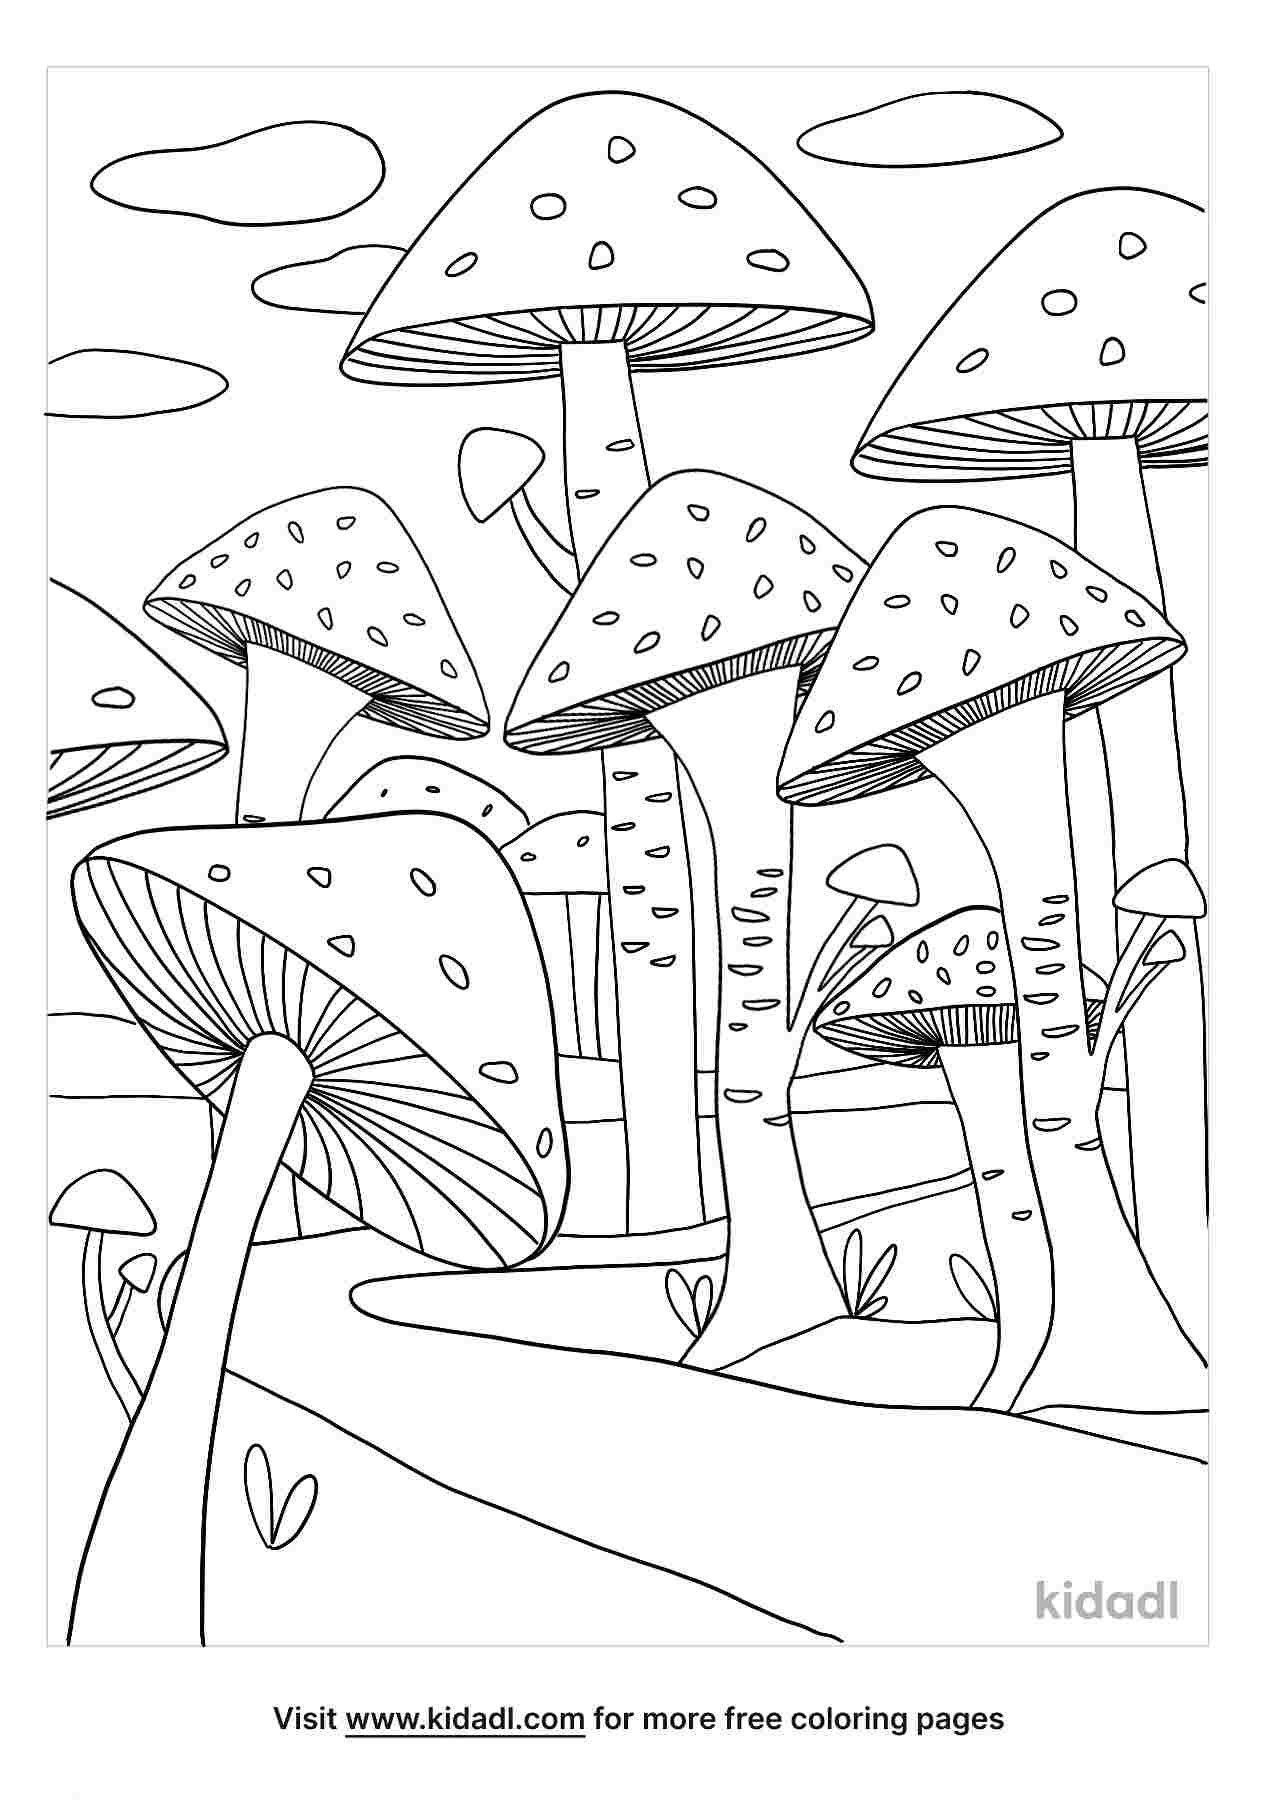 Fun mushroom forest coloring page for kids.